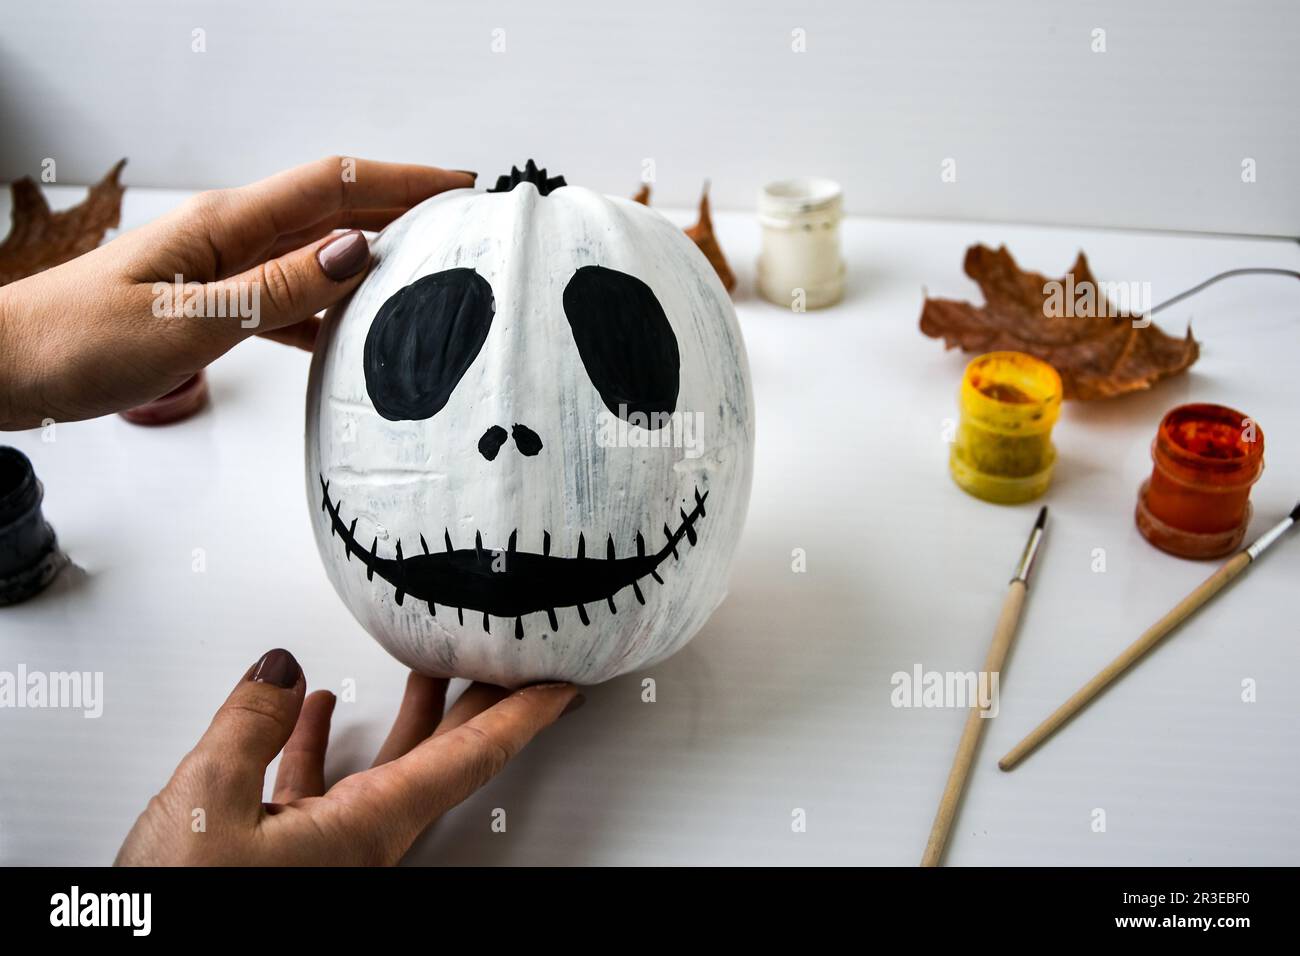 Woman paints face on orange pumpkin for Halloween. Autumn leaves. Diy children craft. Do it yourself. Stock Photo